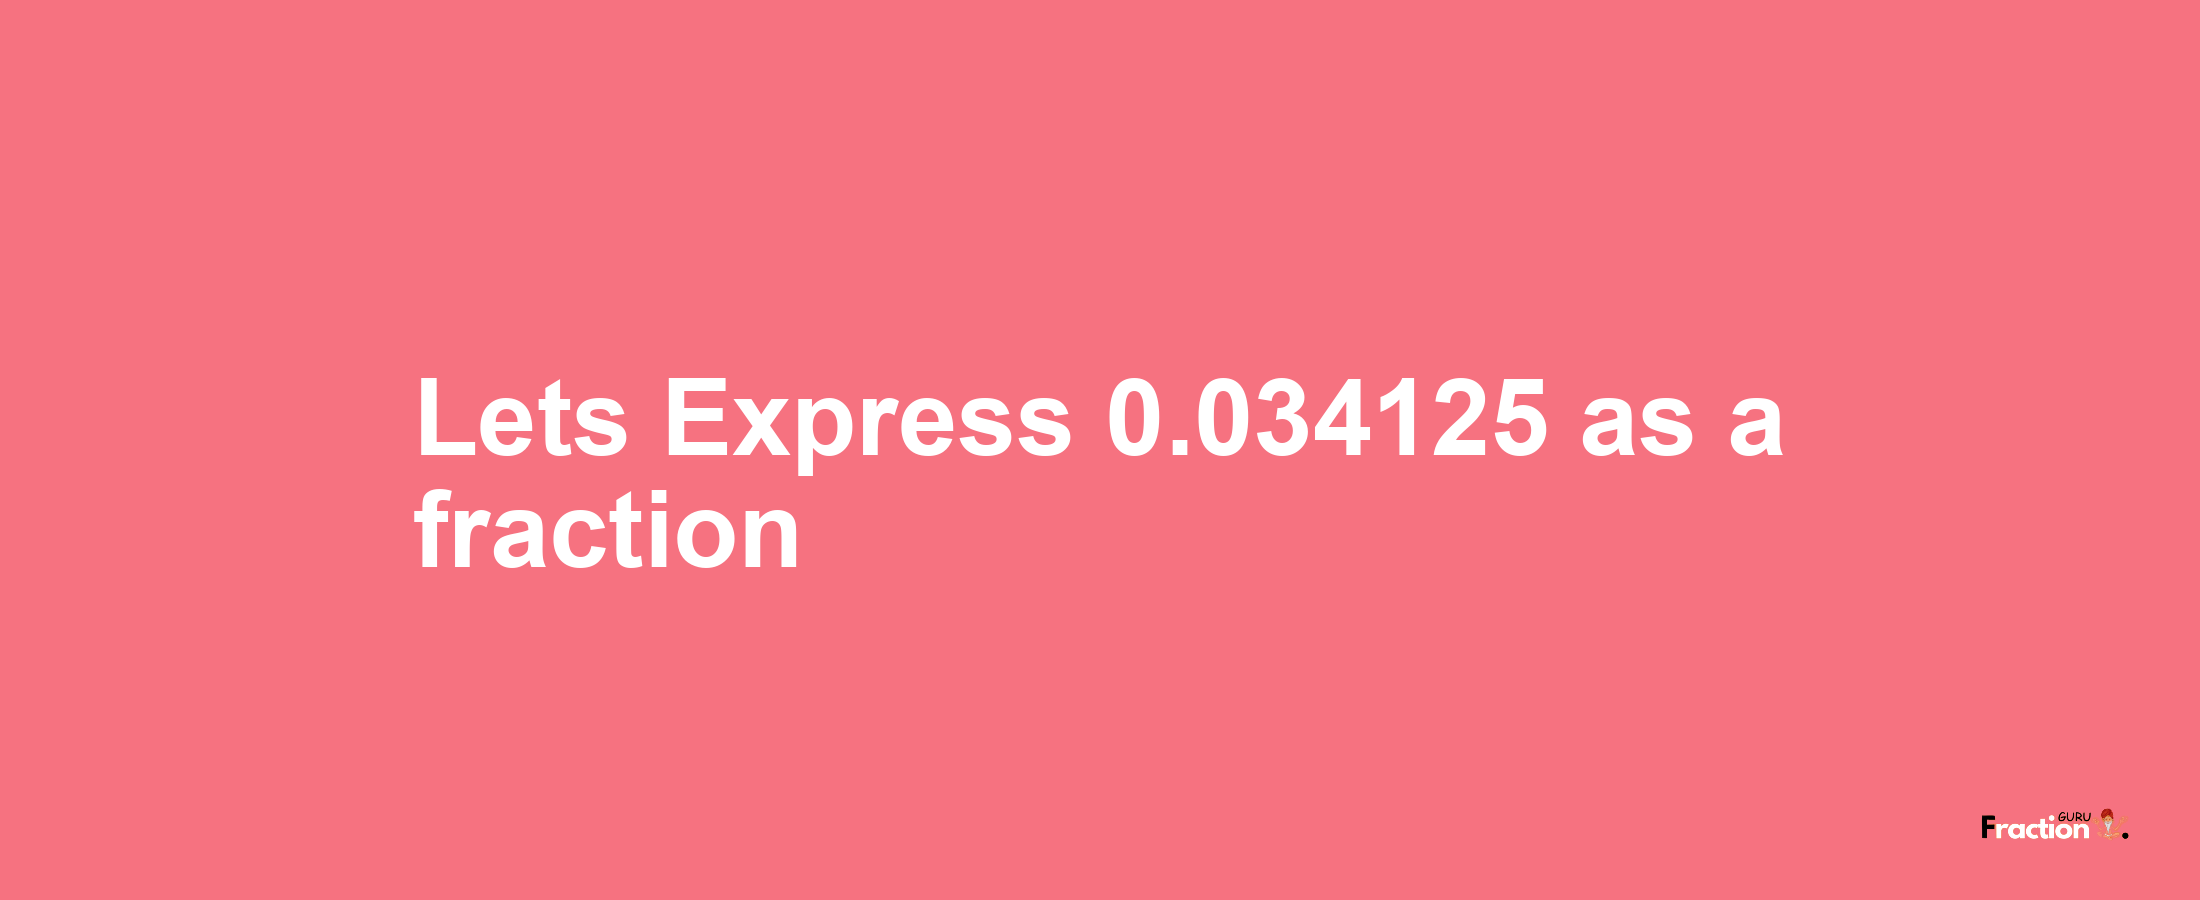 Lets Express 0.034125 as afraction